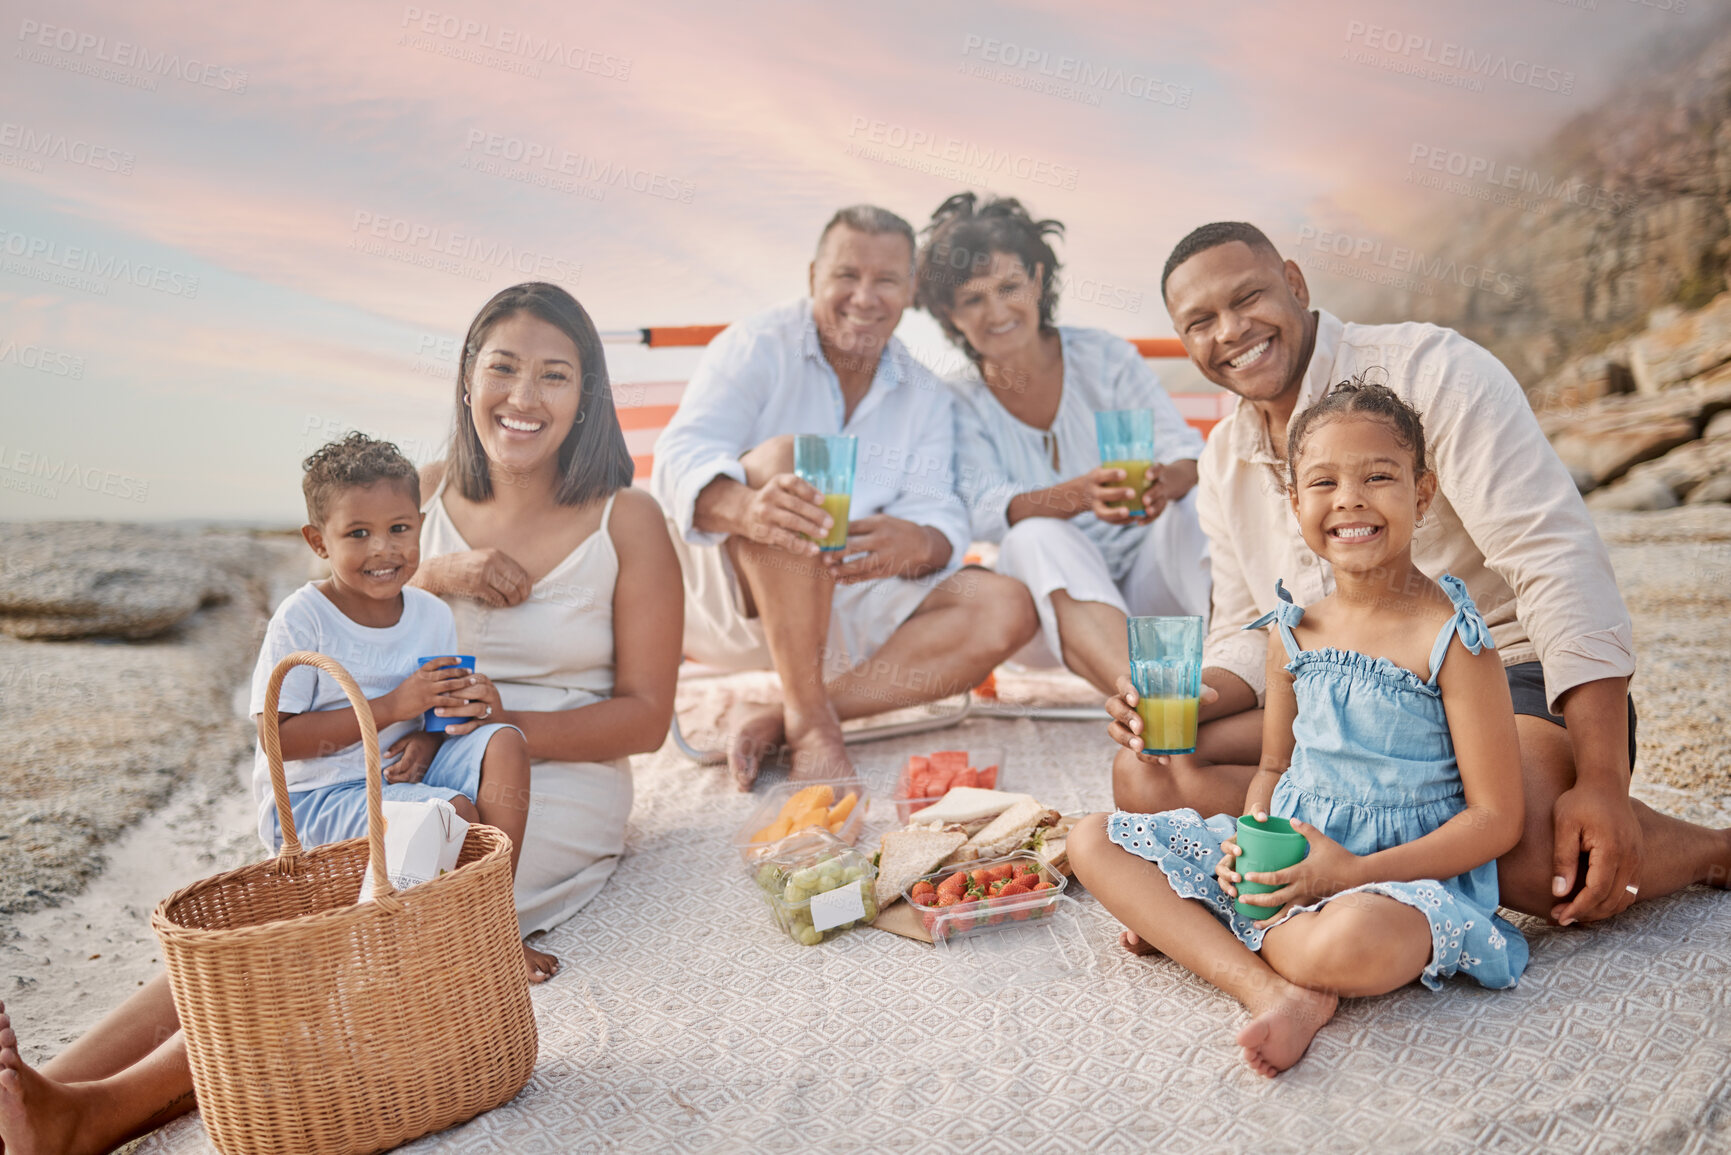 Buy stock photo Closeup of a mixed race family having a picnic on the beach and smiling  while having some food with snacks. Happy family bonding on a day out at the beach